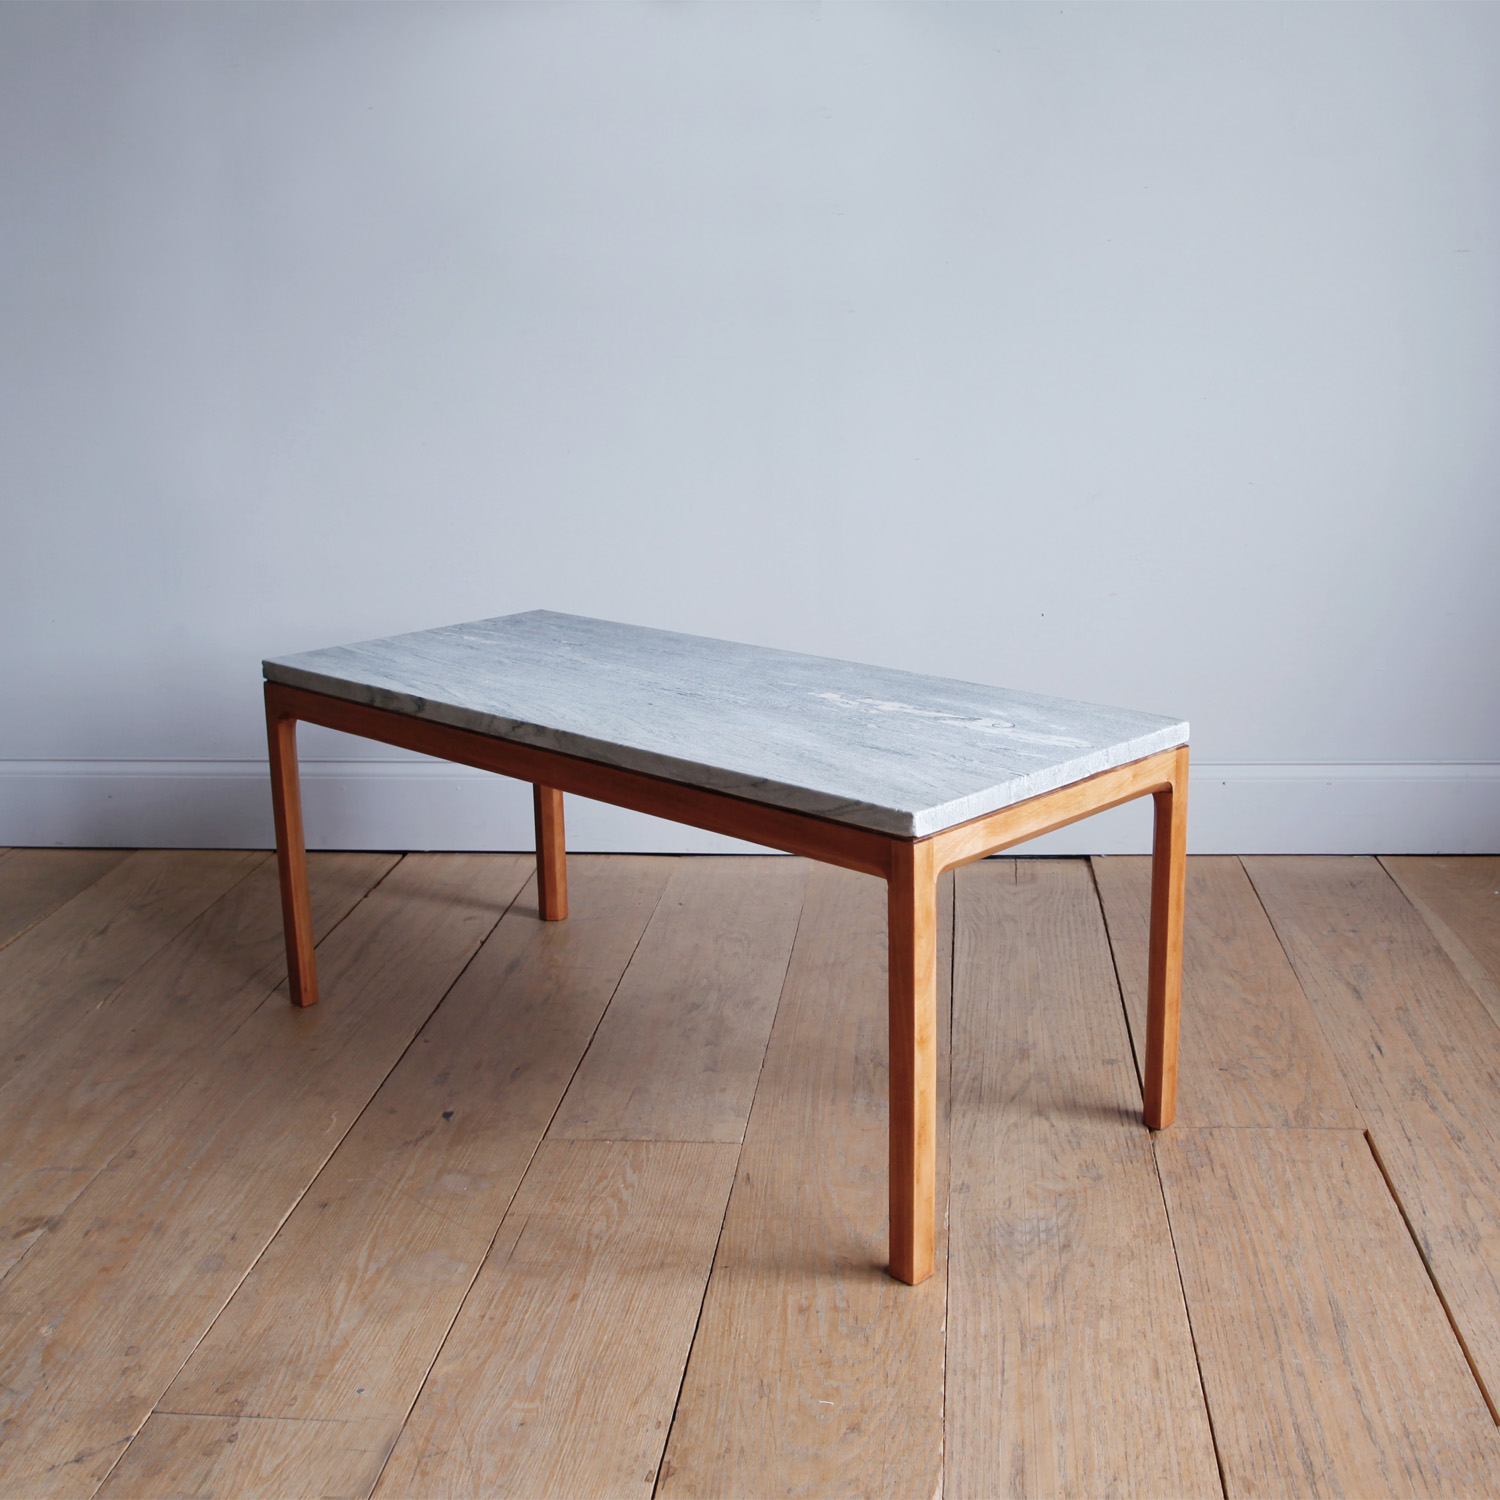 Bernt Petersen Mahogany and Marble Coffee Table